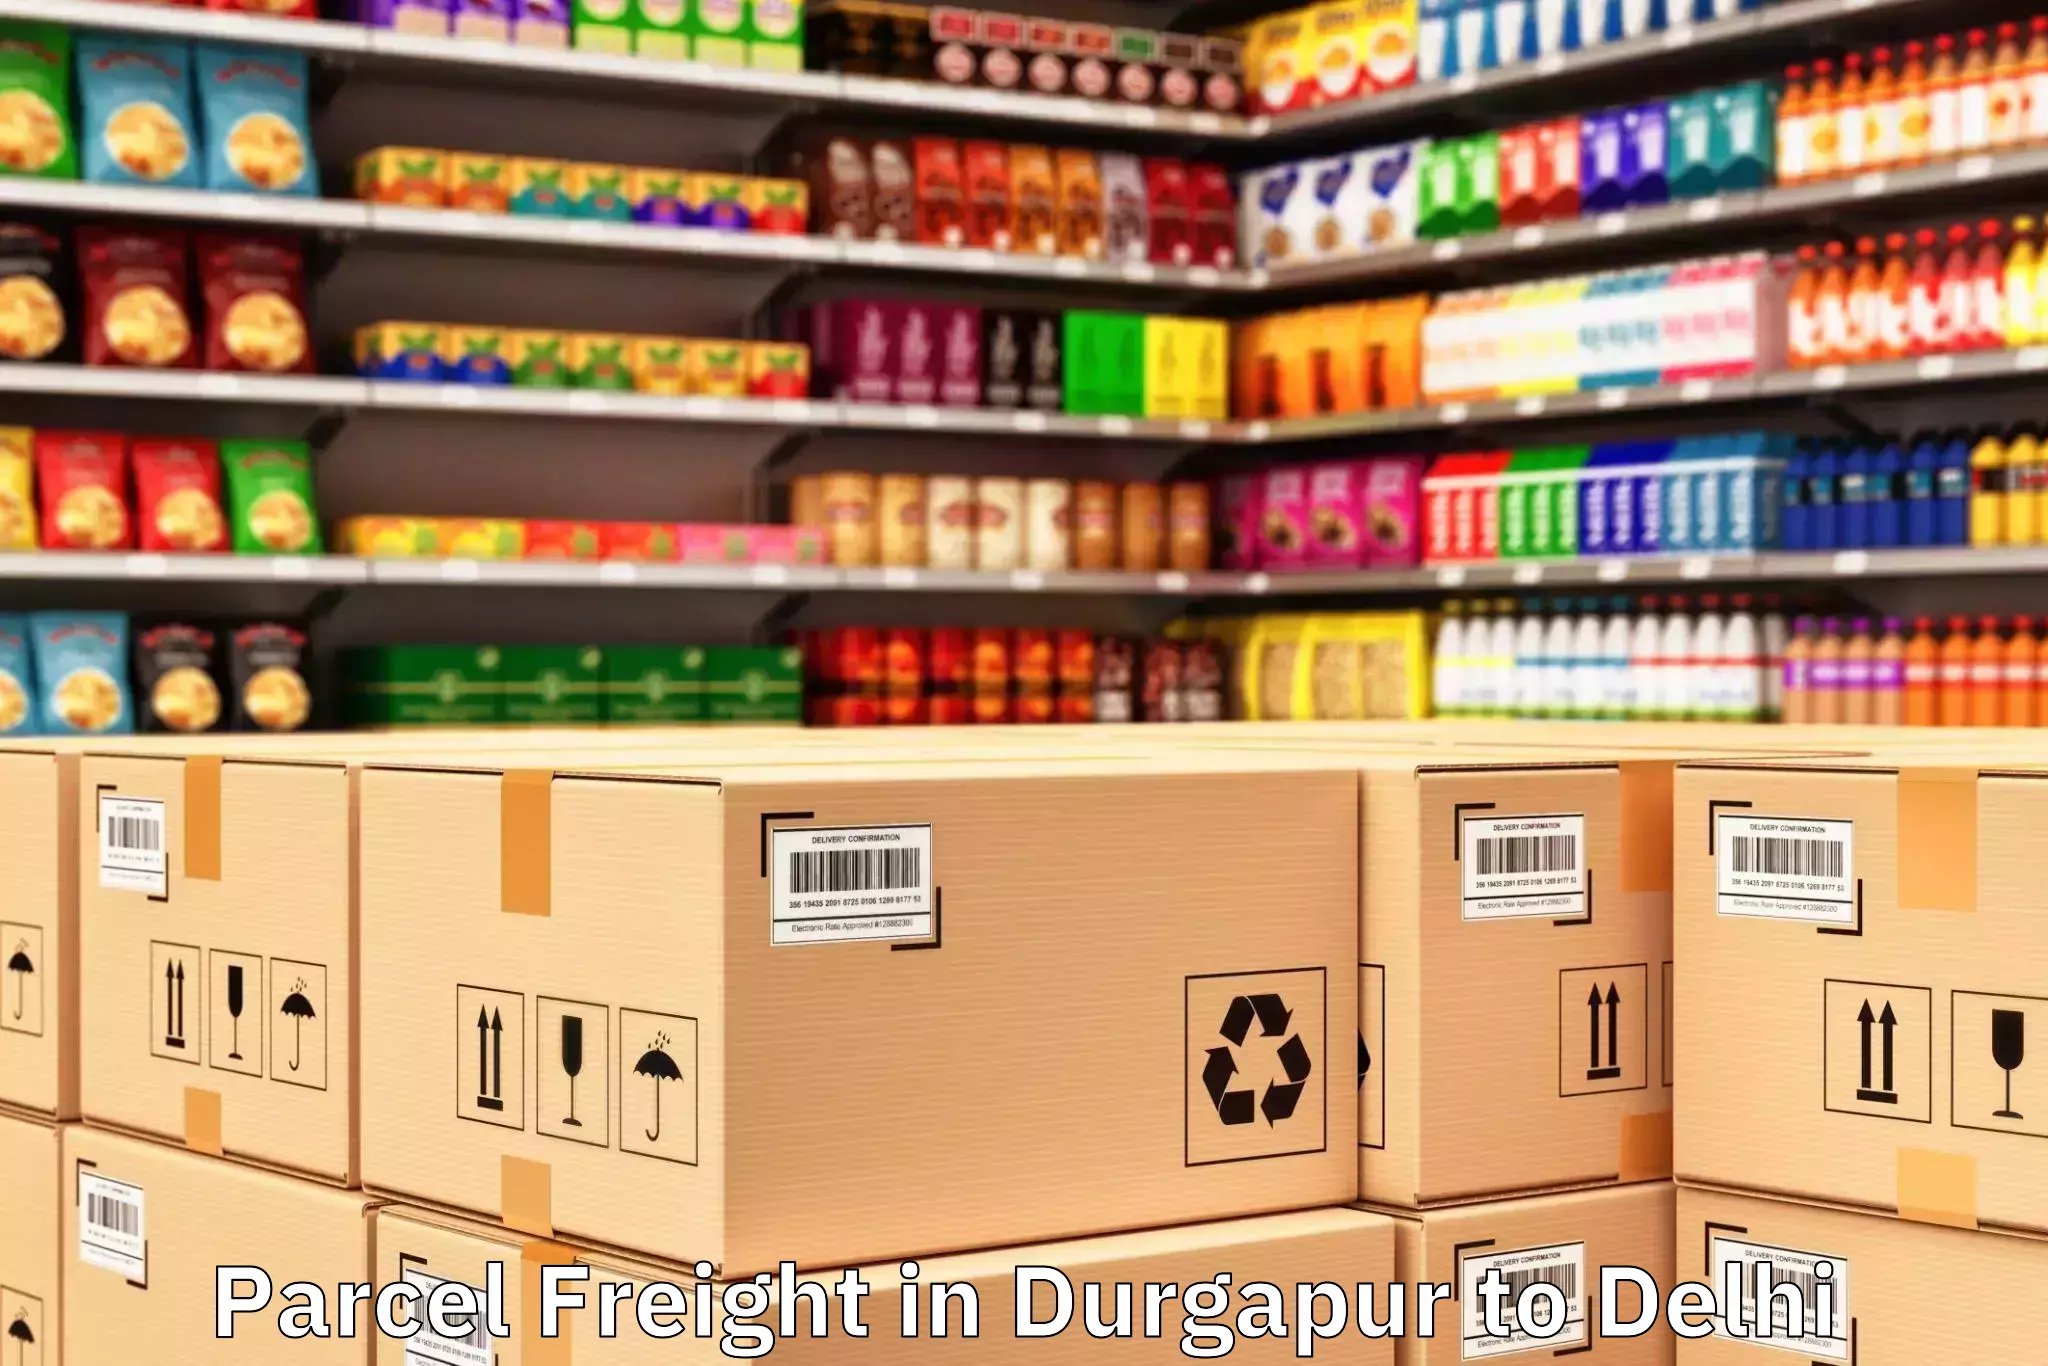 Efficient Durgapur to Functional Industrial Estate For Electronics Parcel Freight